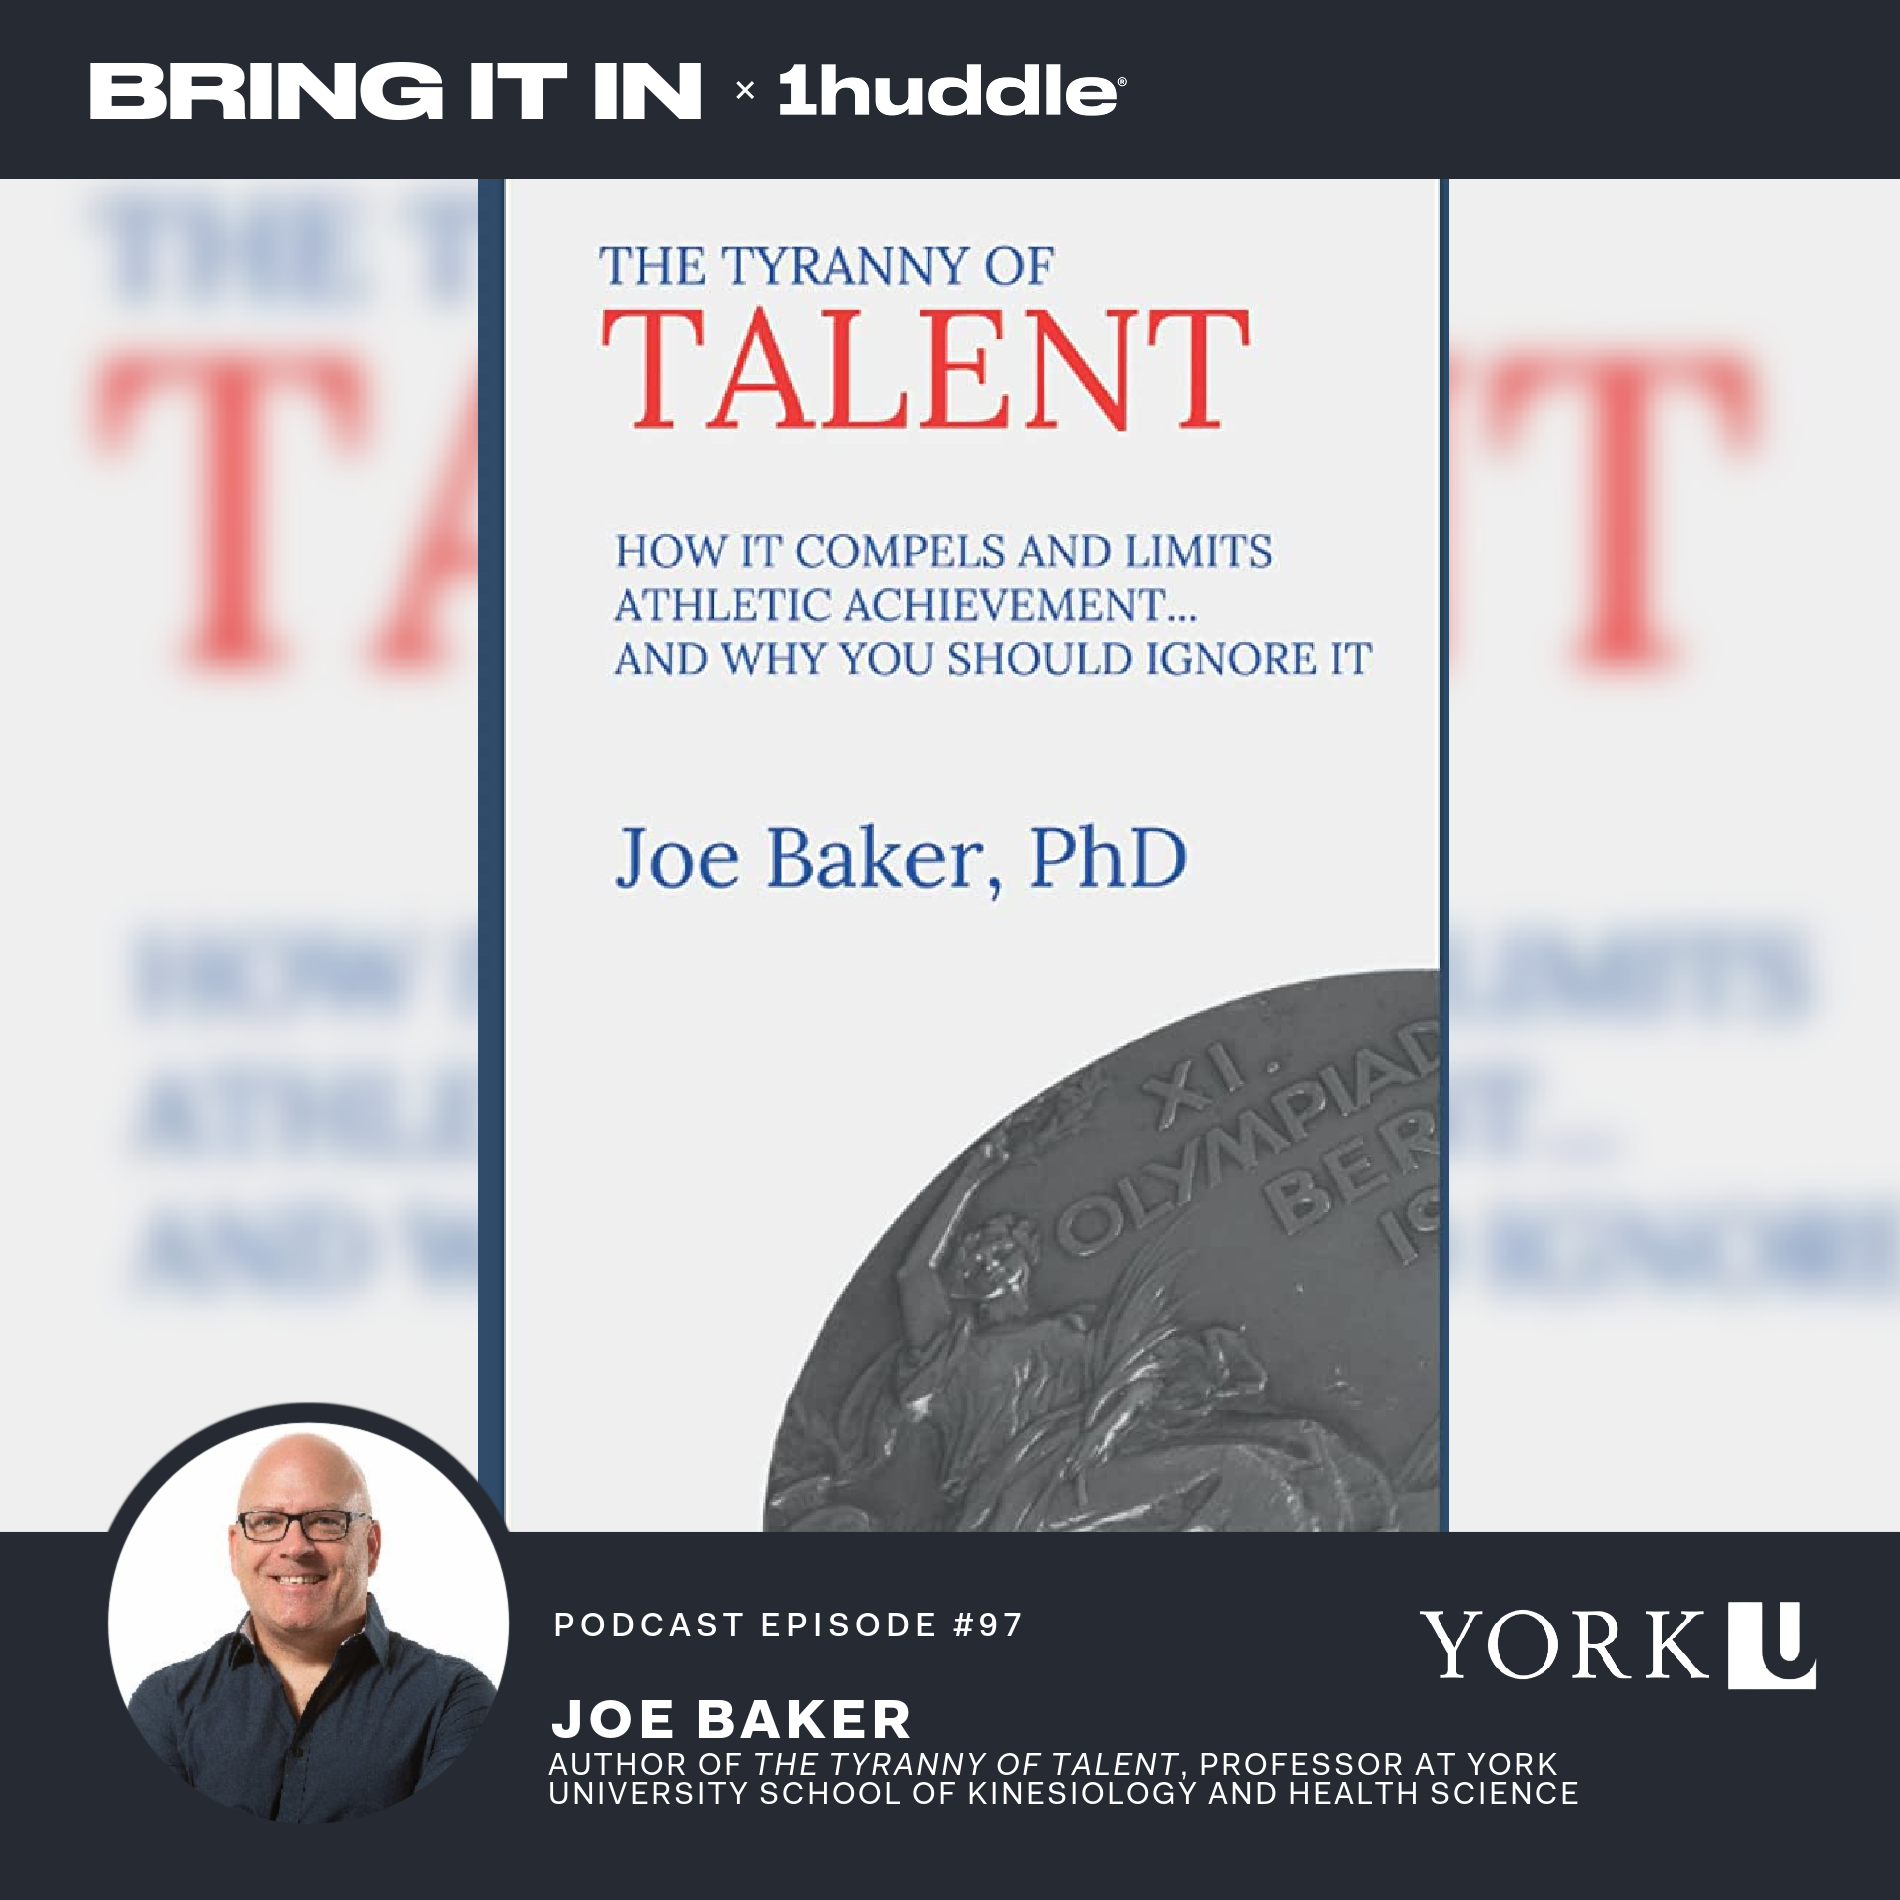 Joe Baker, Author of “The Tyranny of Talent: How it Compels and Limits Athletic Achievement…and Why You Should Ignore It,” High-Performance Sports Coach, Professor at York University